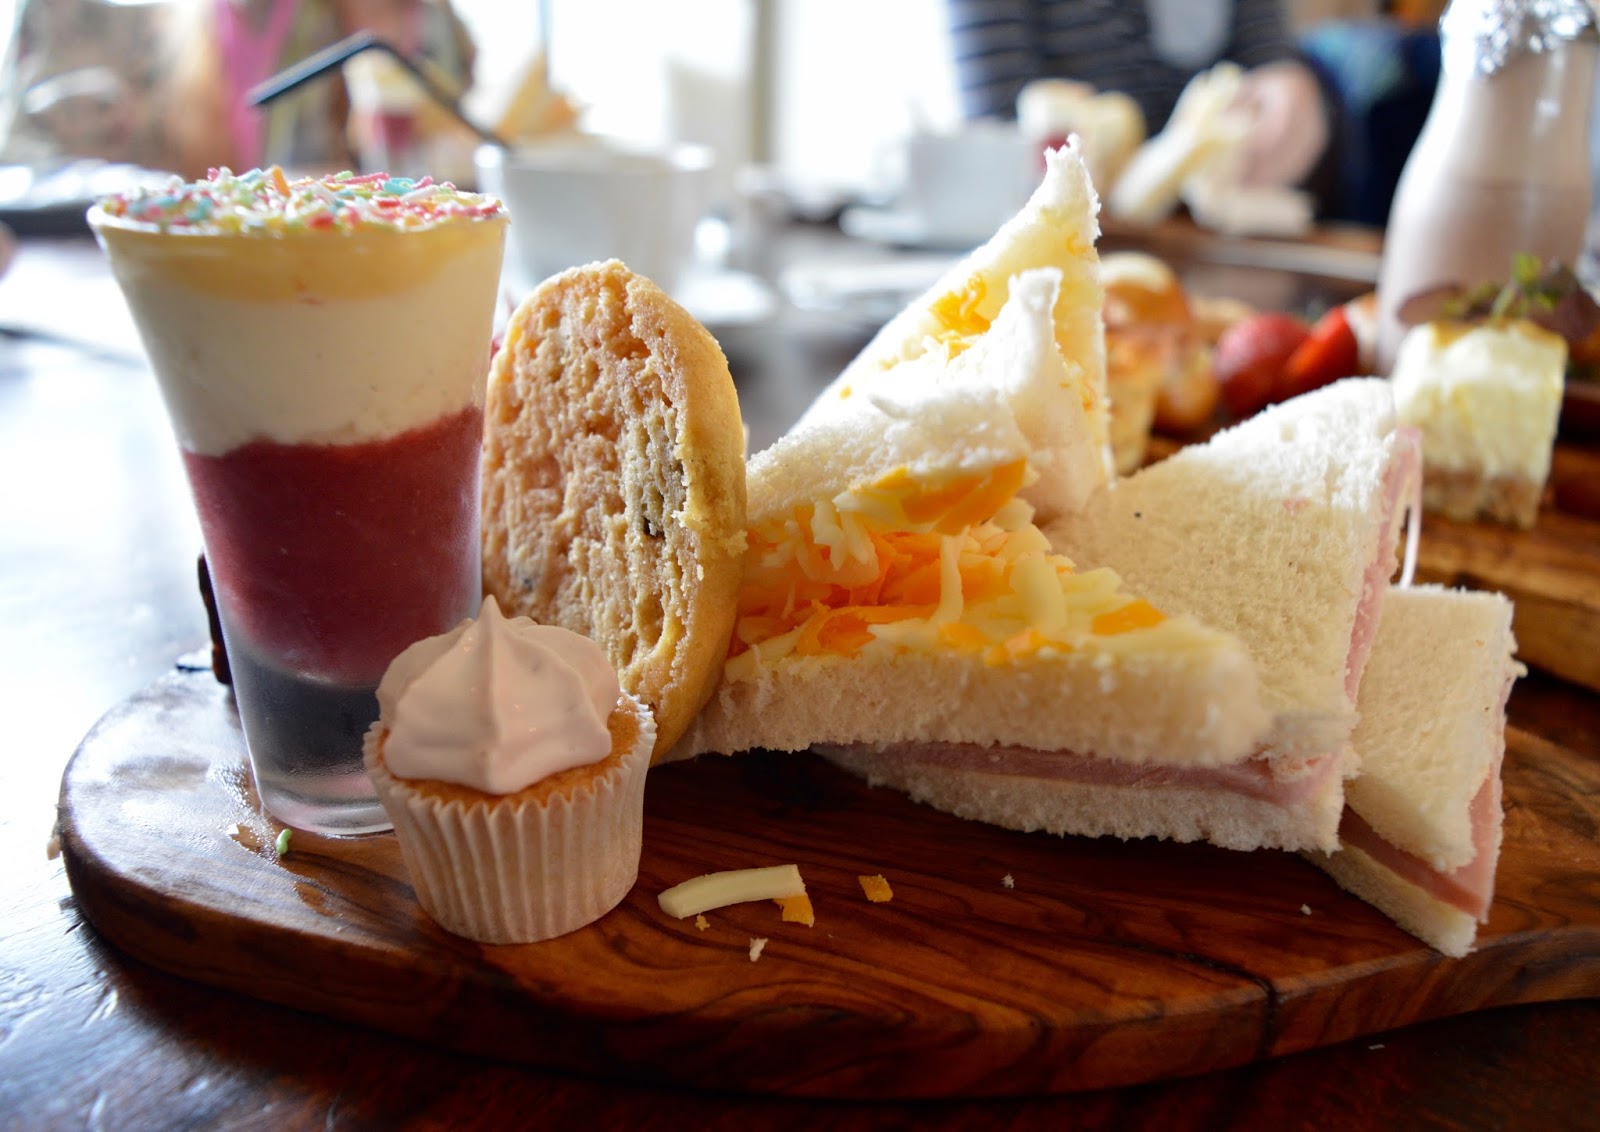 A Fabulous Children's Afternoon Tea in the North East at Sorella Sorella